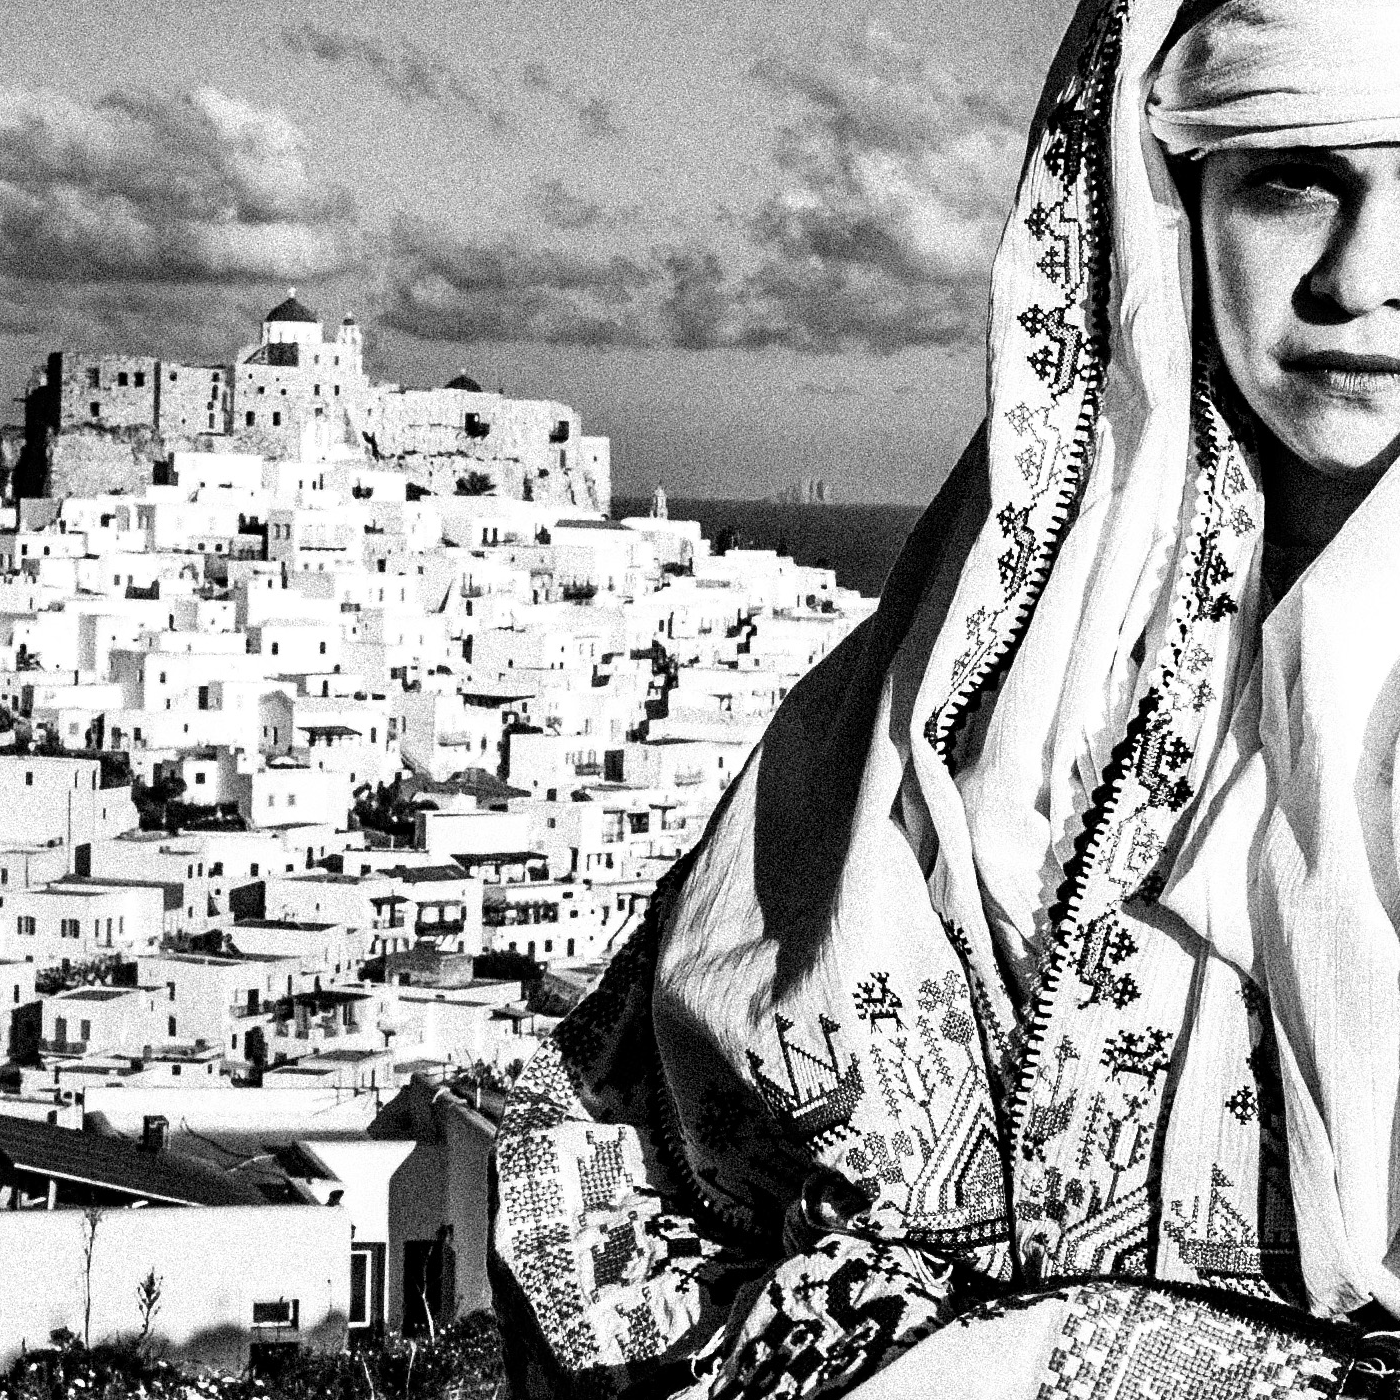 Black and White Photography Wall Art Greece | Costume of Astypalaea Dodecanese Greece by George Tatakis - detailed view